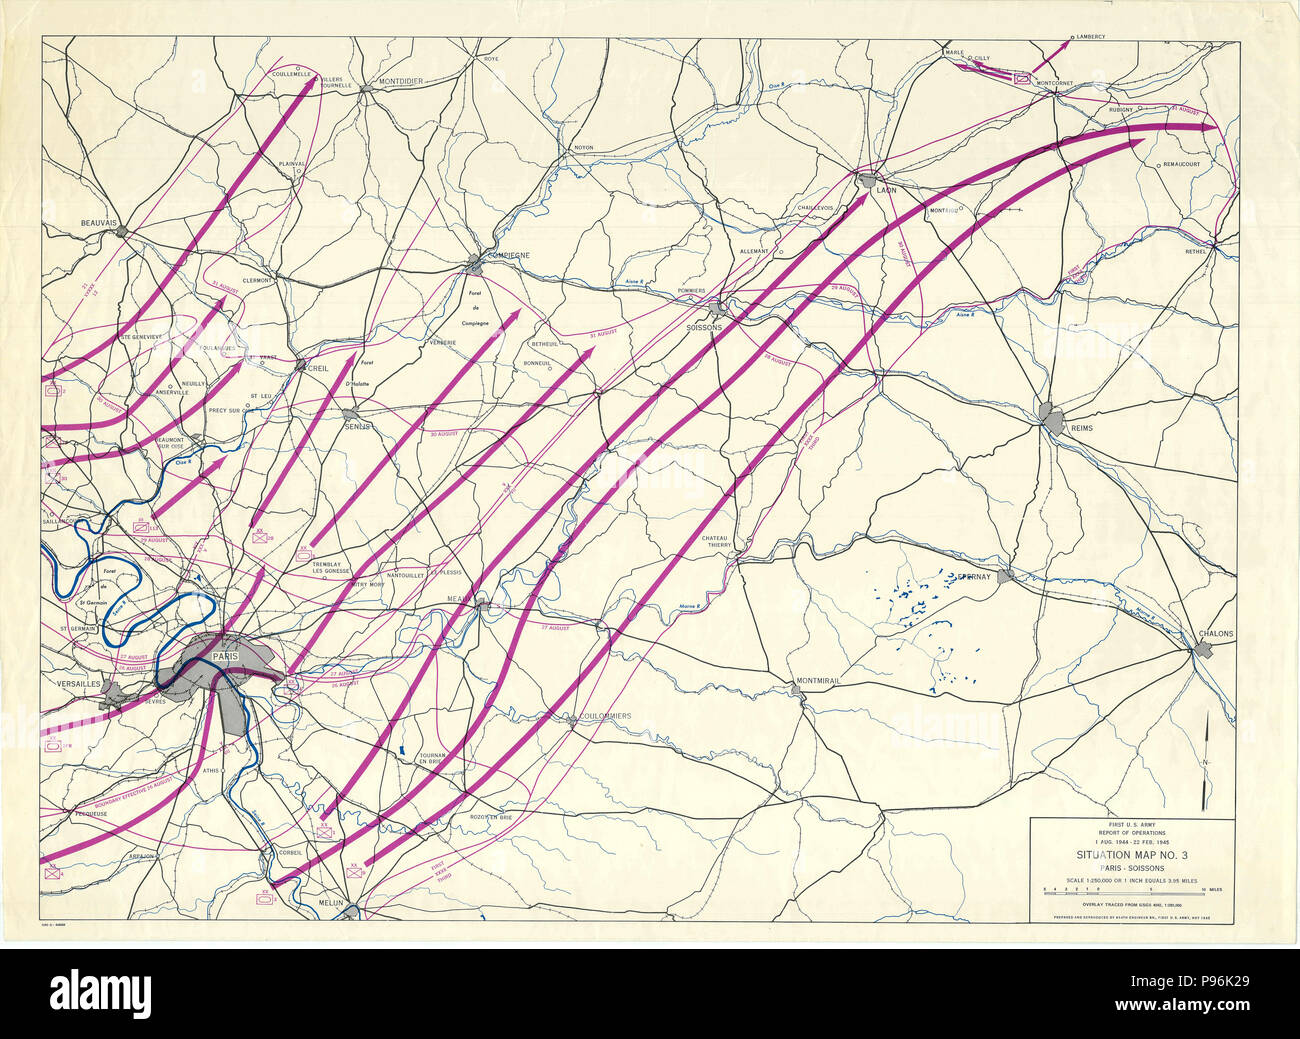 France World War Two Map - Situation Map No. 3 Paris - Soissons   First U.S. Army Operations Report - August 1, 1944 - February 22, 1945 Stock Photo